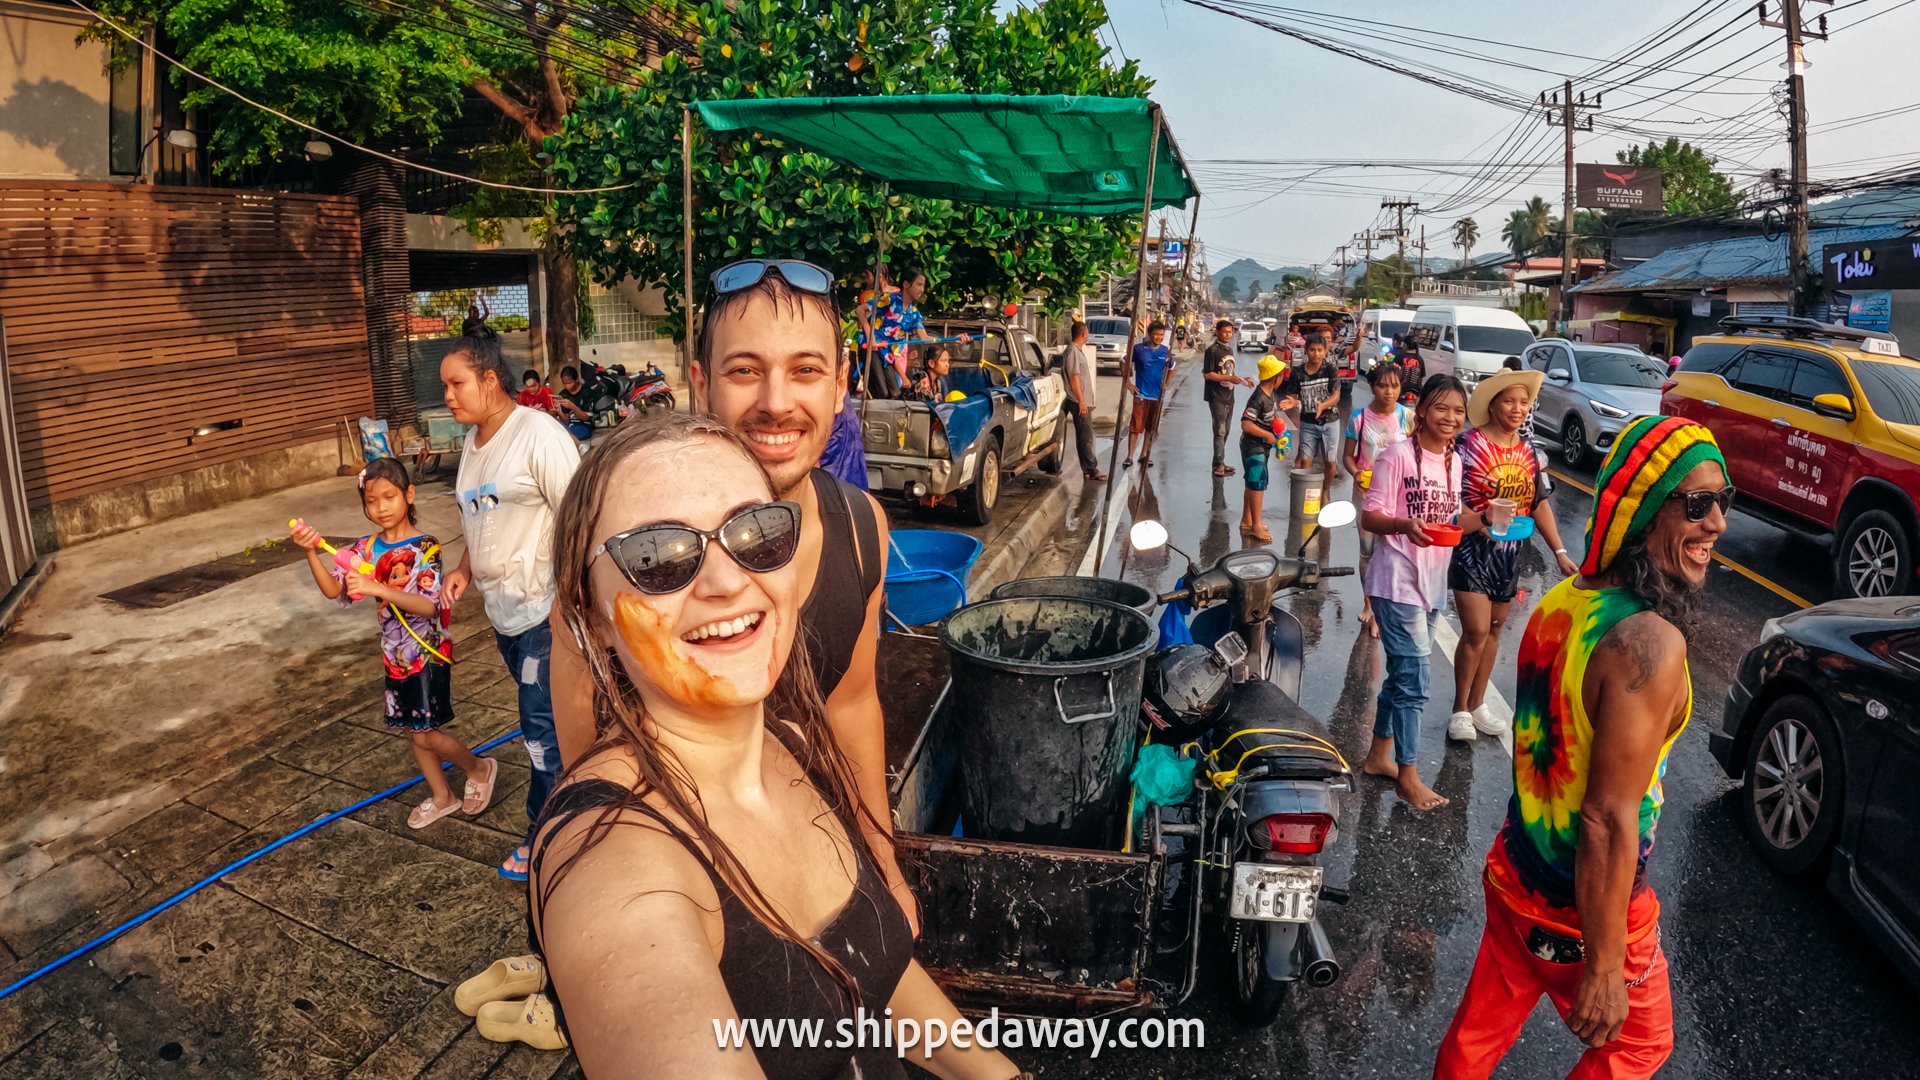 Complete guide for an unforgettable trip to the Songkran Festival in Thailand: Thai New Year water fights, parades, and cultural celebrations. - Songkran Tourist Guide - First Timer's Guide to Songkran